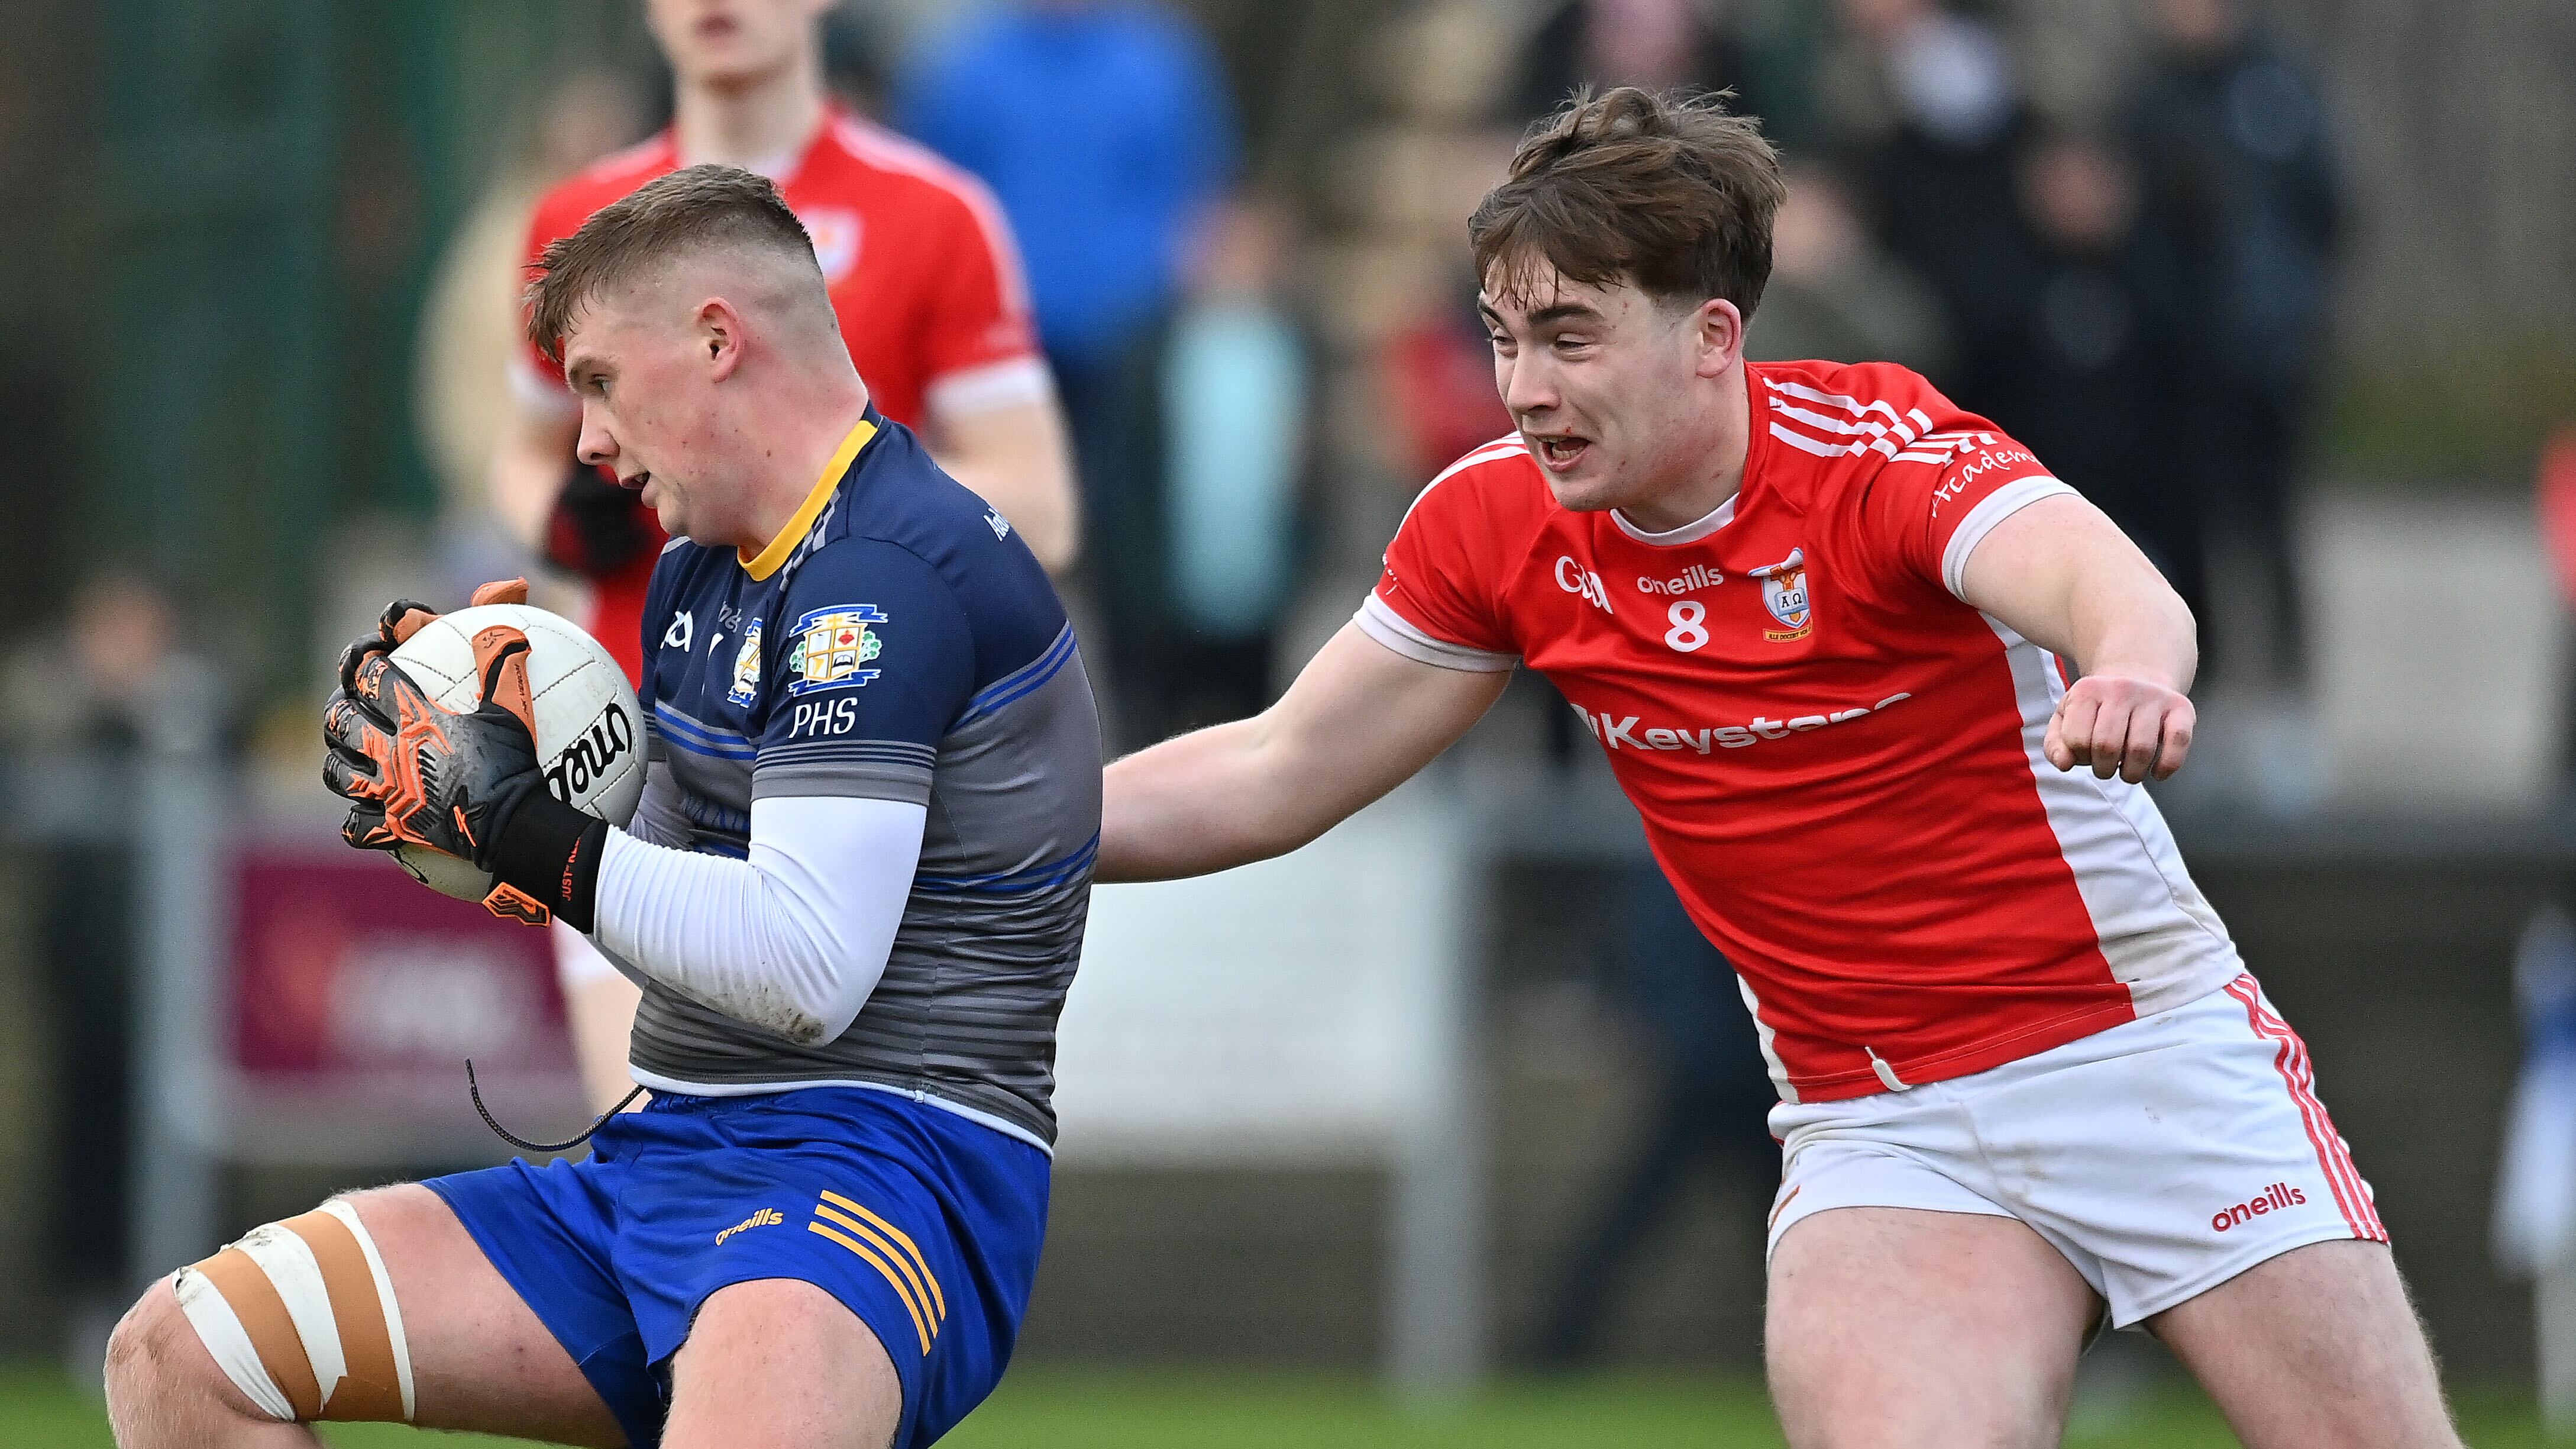 St Patrick’s, Dungannon midfielder Sean Hughes (right) puts the pressure on Patrician College, Carrickmacross’s Oran Finnegan during the MacRory Cup quarter-final clash at Galbally